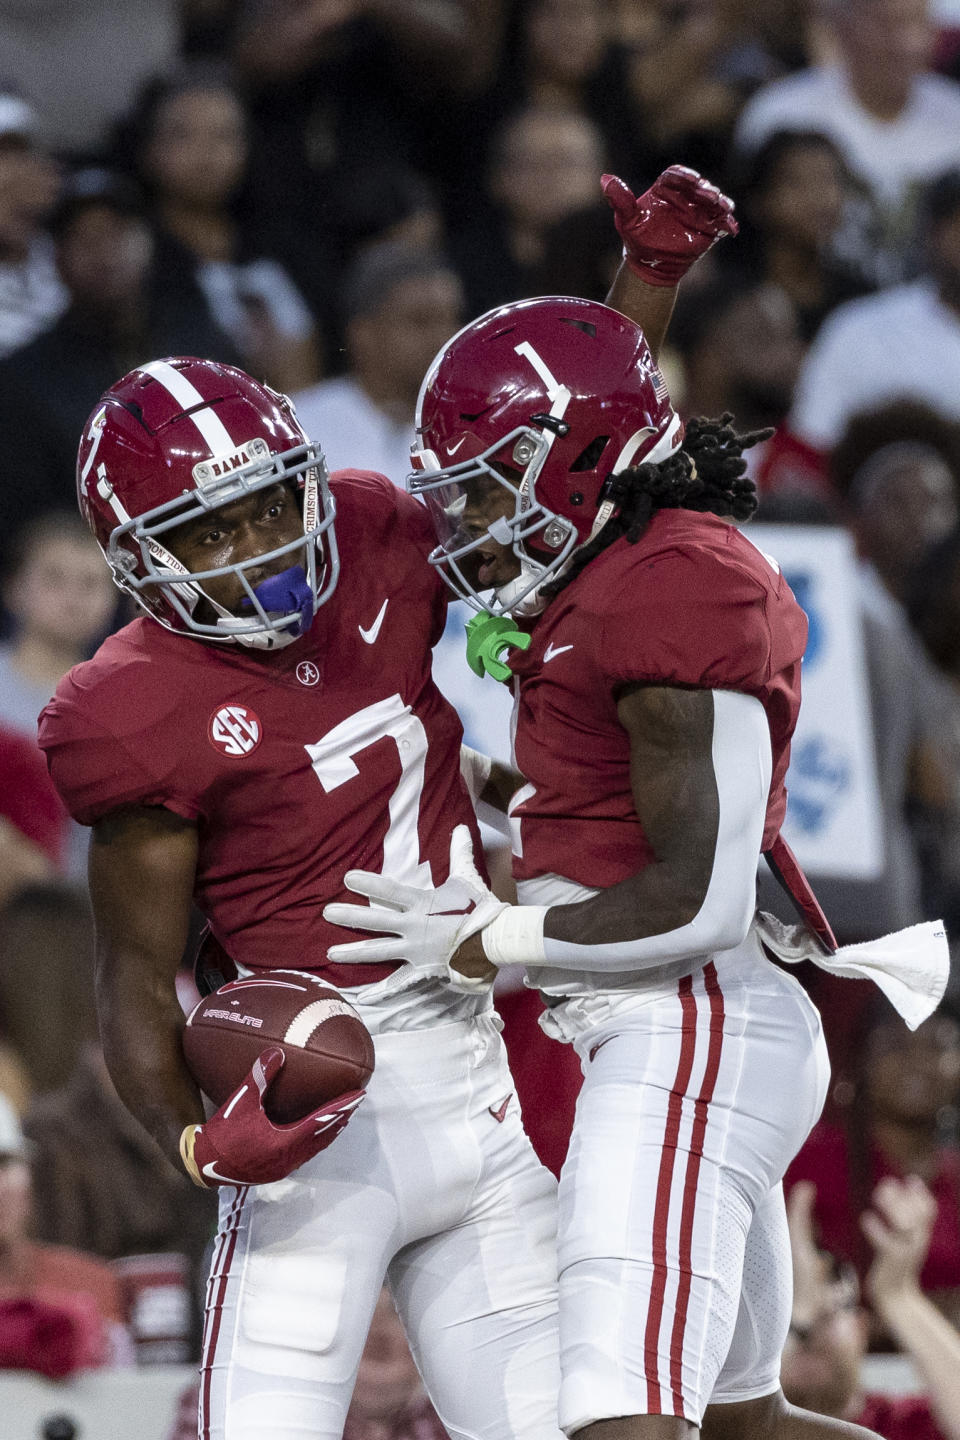 Alabama wide receiver Ja'Corey Brooks (7) celebrates with running back Jahmyr Gibbs (1) after Brooks' touchdown against Vanderbilt during the first half of an NCAA college football game Saturday, Sept. 24, 2022, in Tuscaloosa, Ala. (AP Photo/Vasha Hunt)